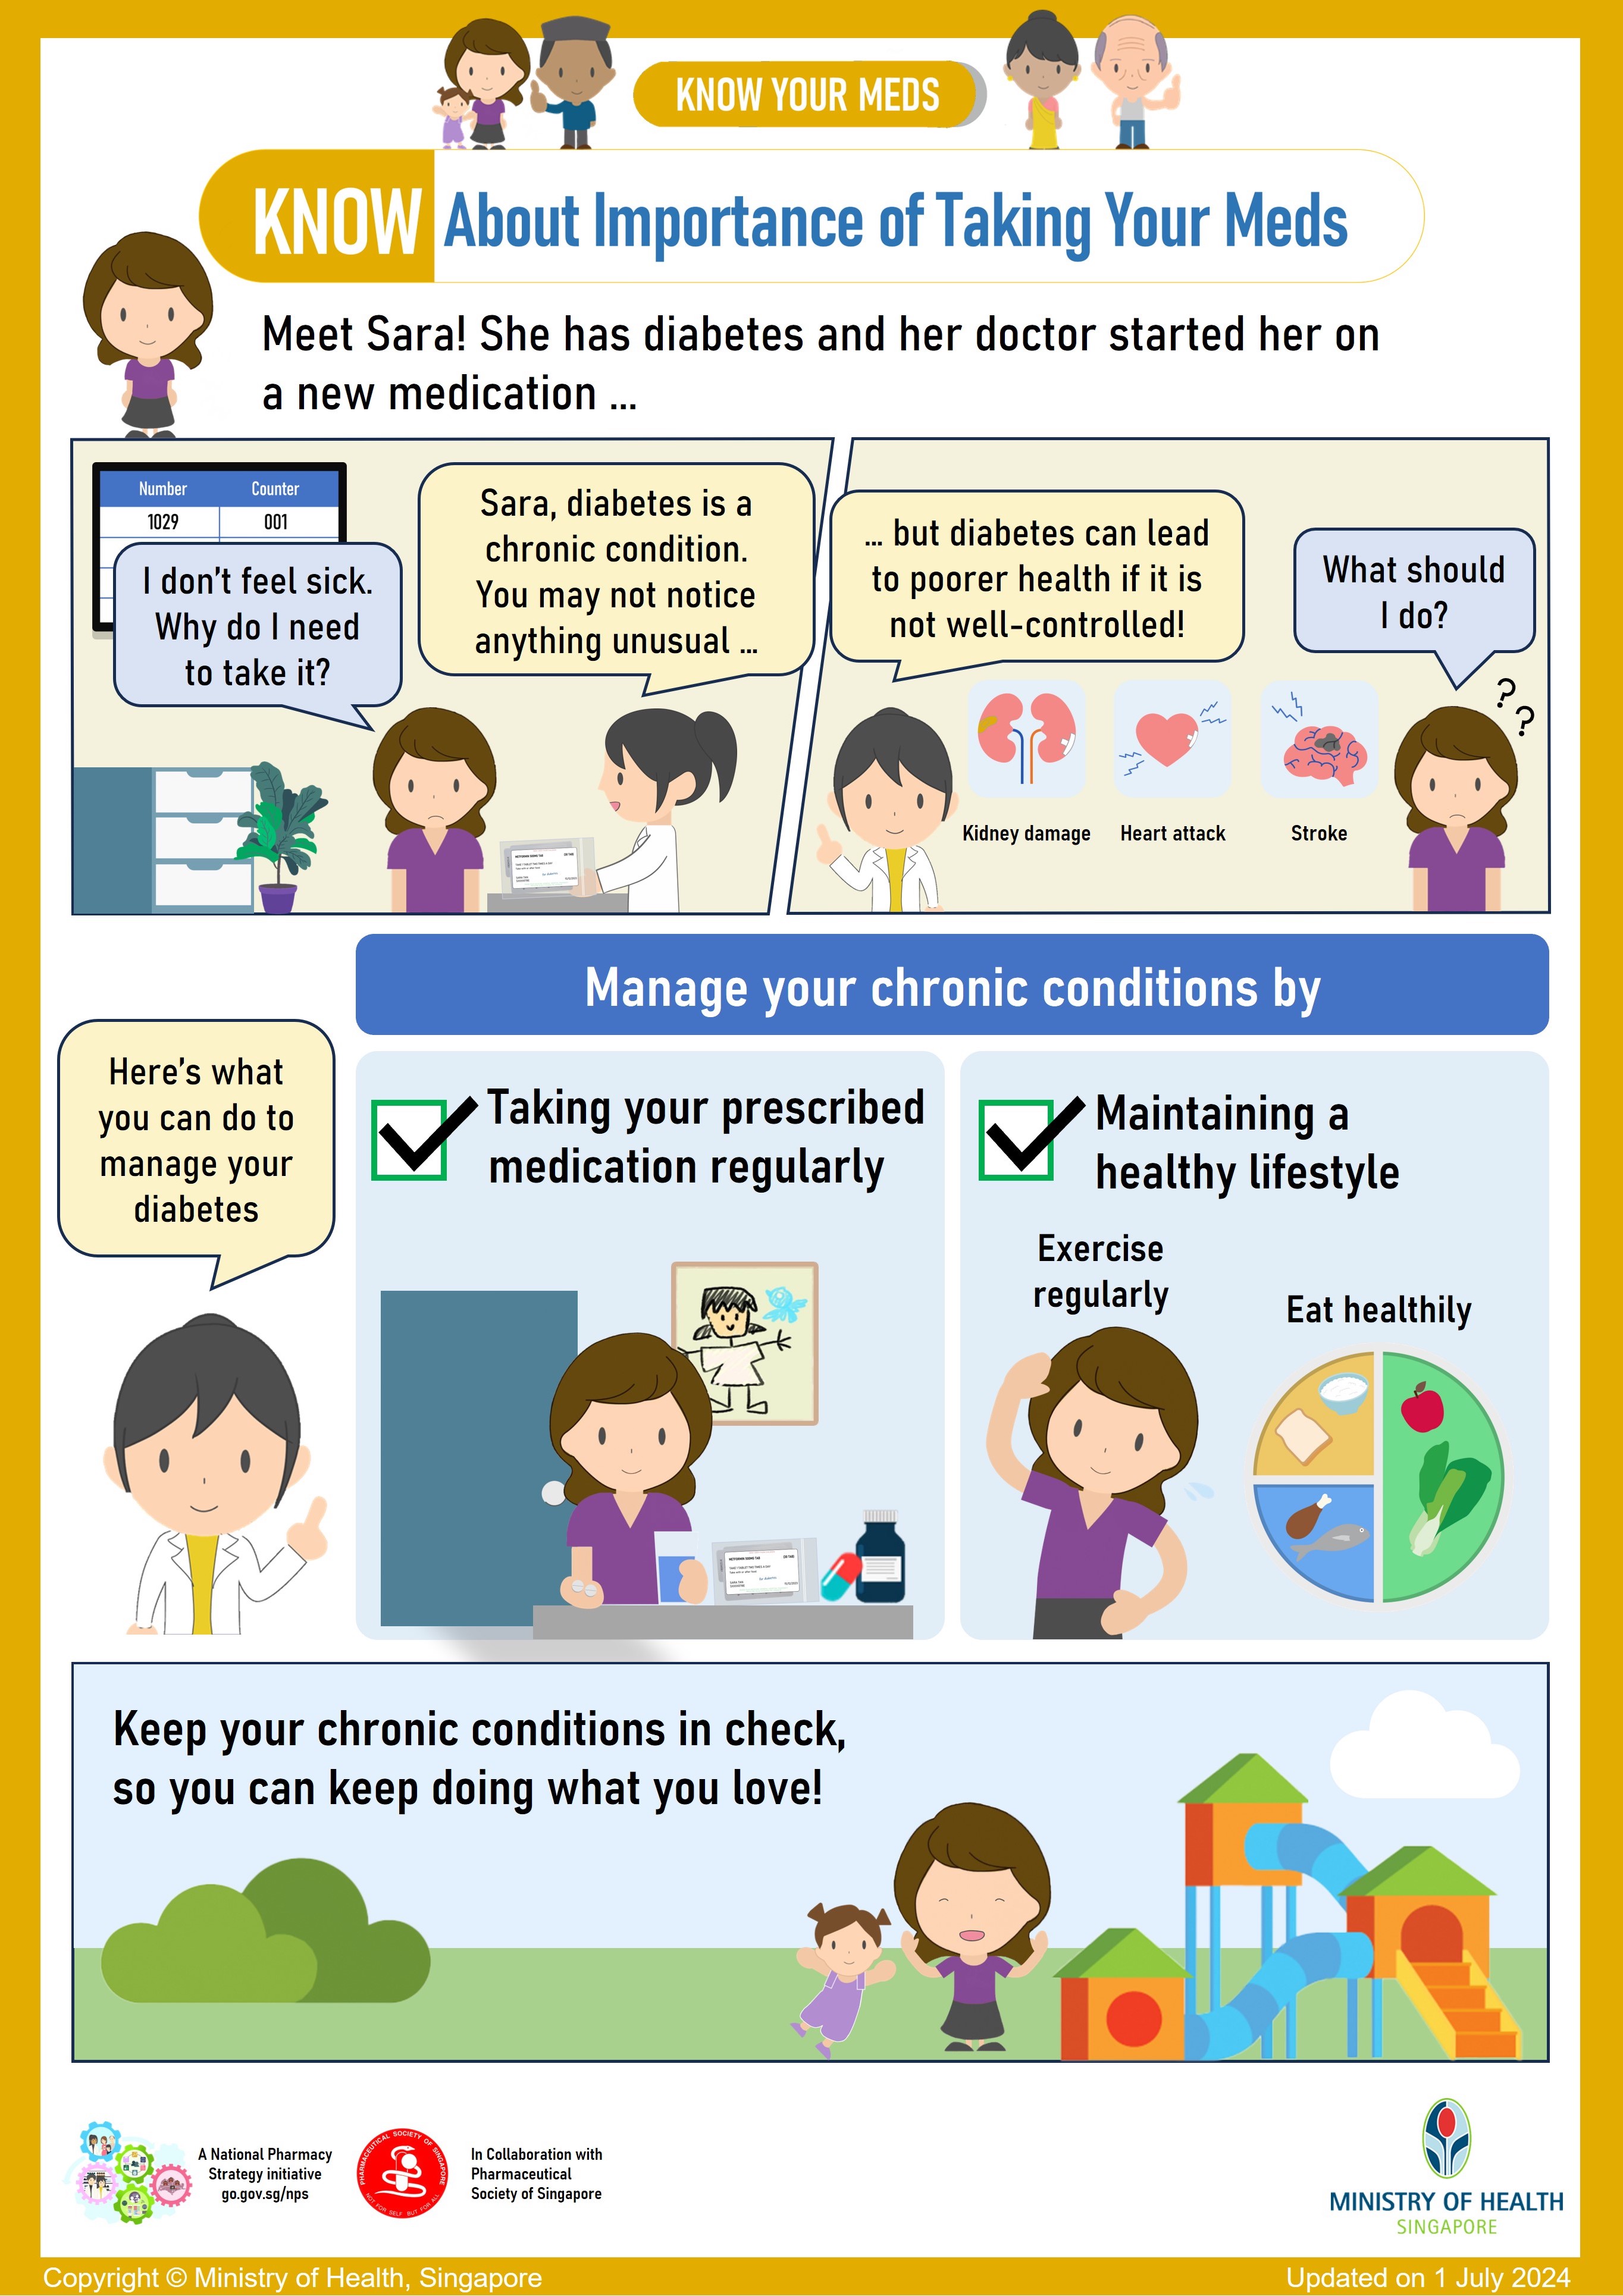 Know About Importance of Taking Your Meds